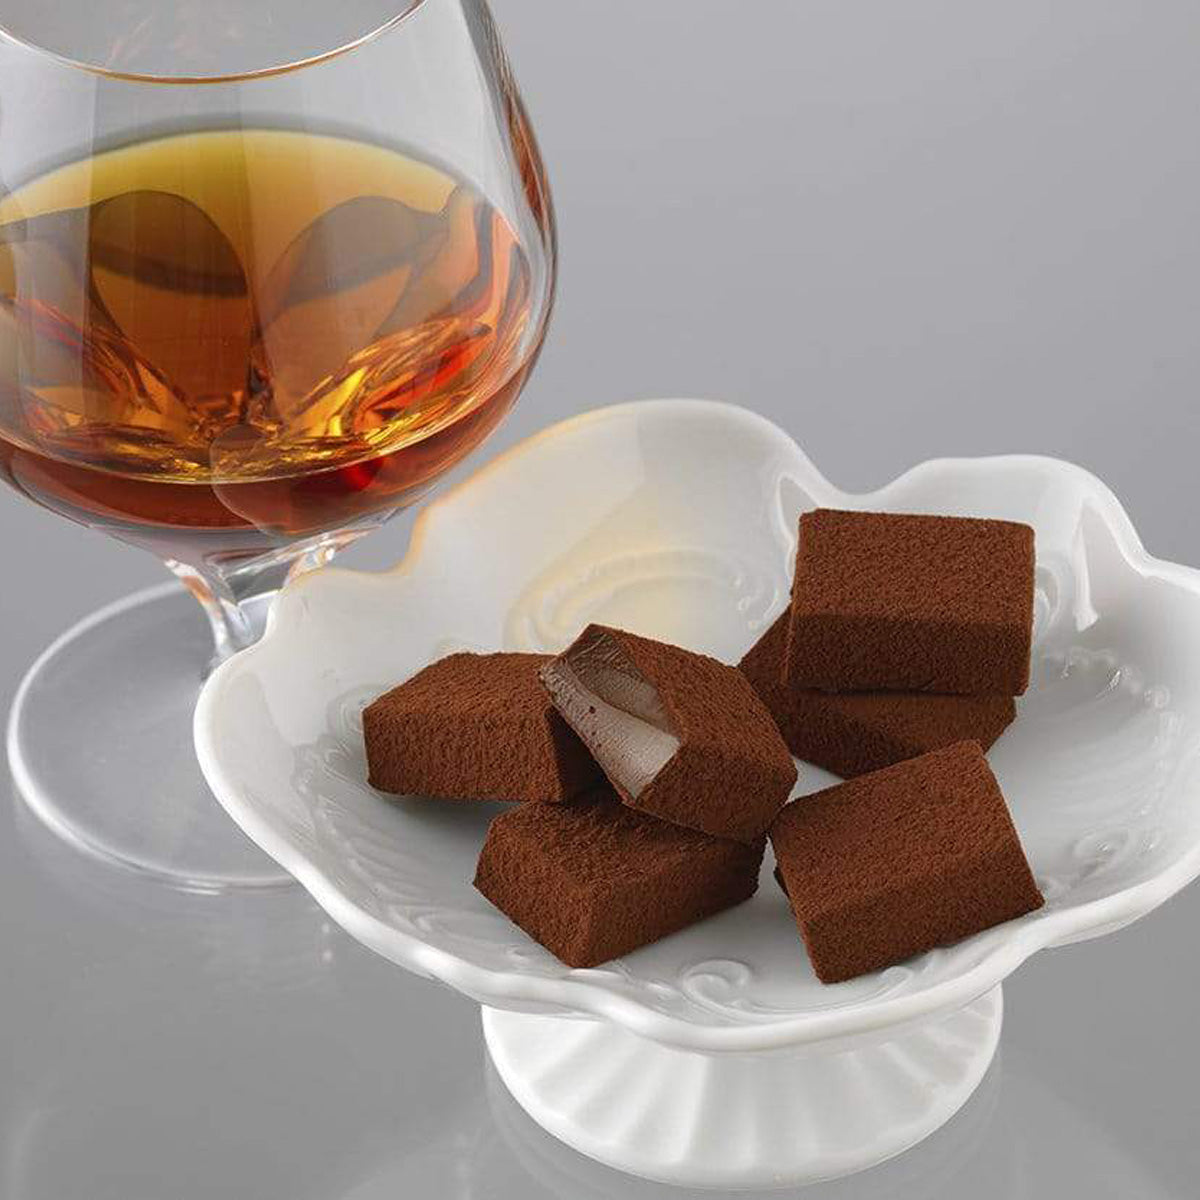 ROYCE' Chocolate - Nama Chocolate "Islay Whisky (Port Charlotte)" - Image shows brown blocks of chocolates in a white flower-shaped plate. Also seen is a clear glass on left with amber-hued whisky. Background is light gray.